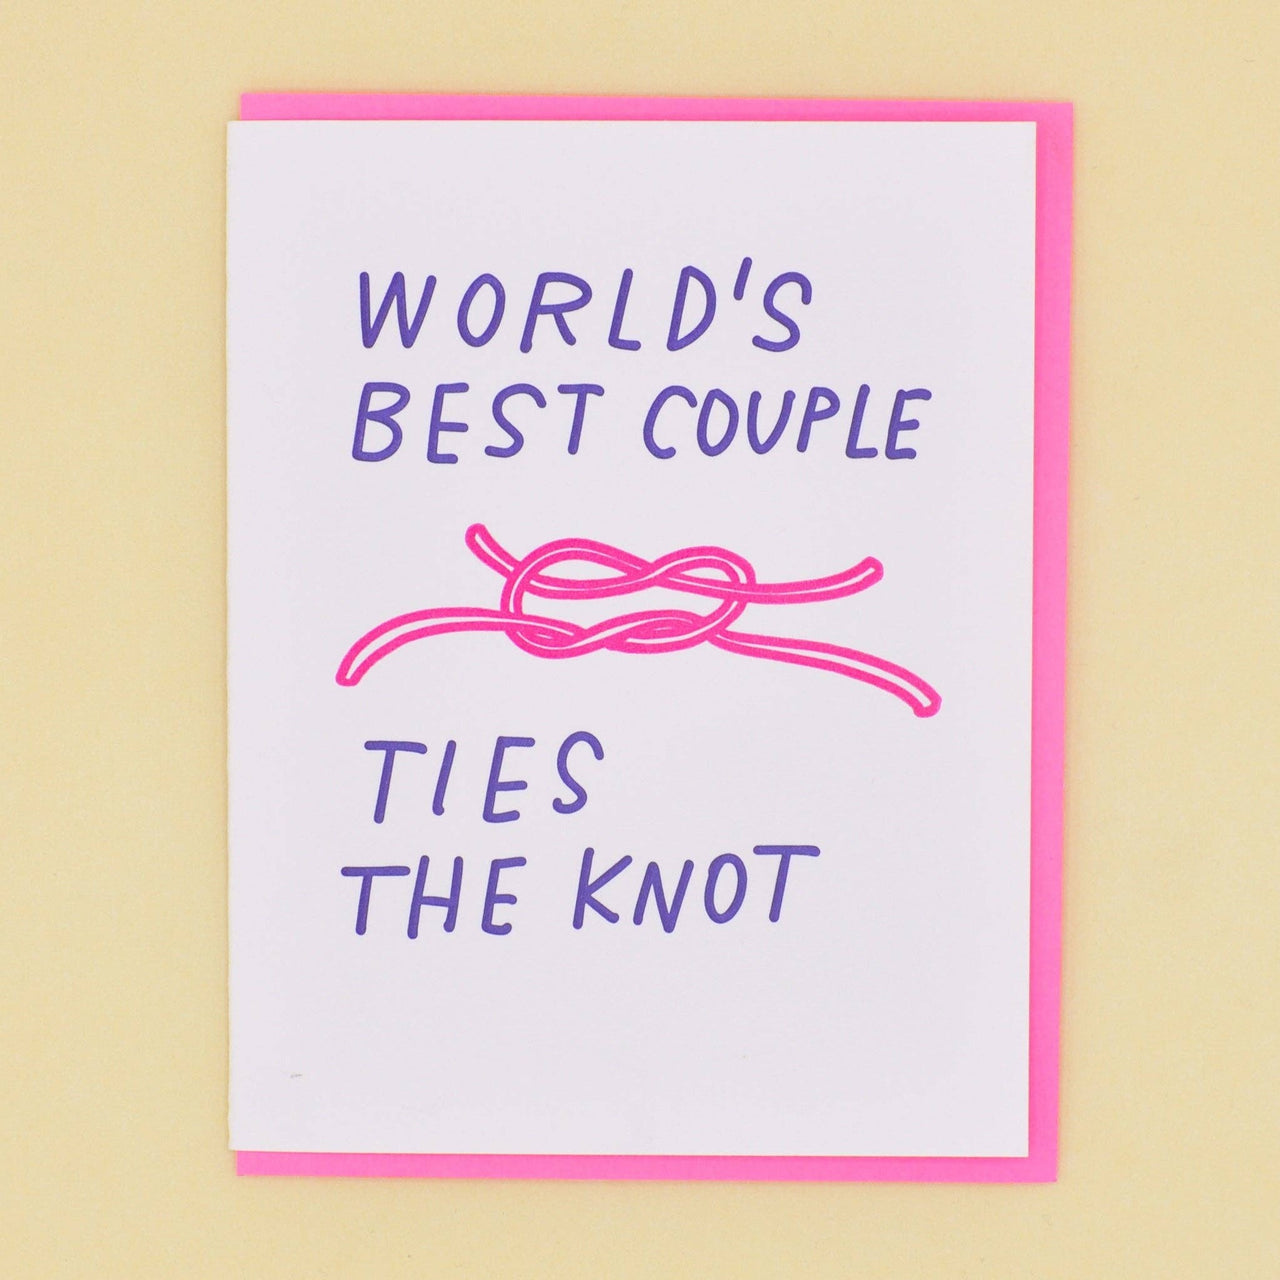 Ties the Knot